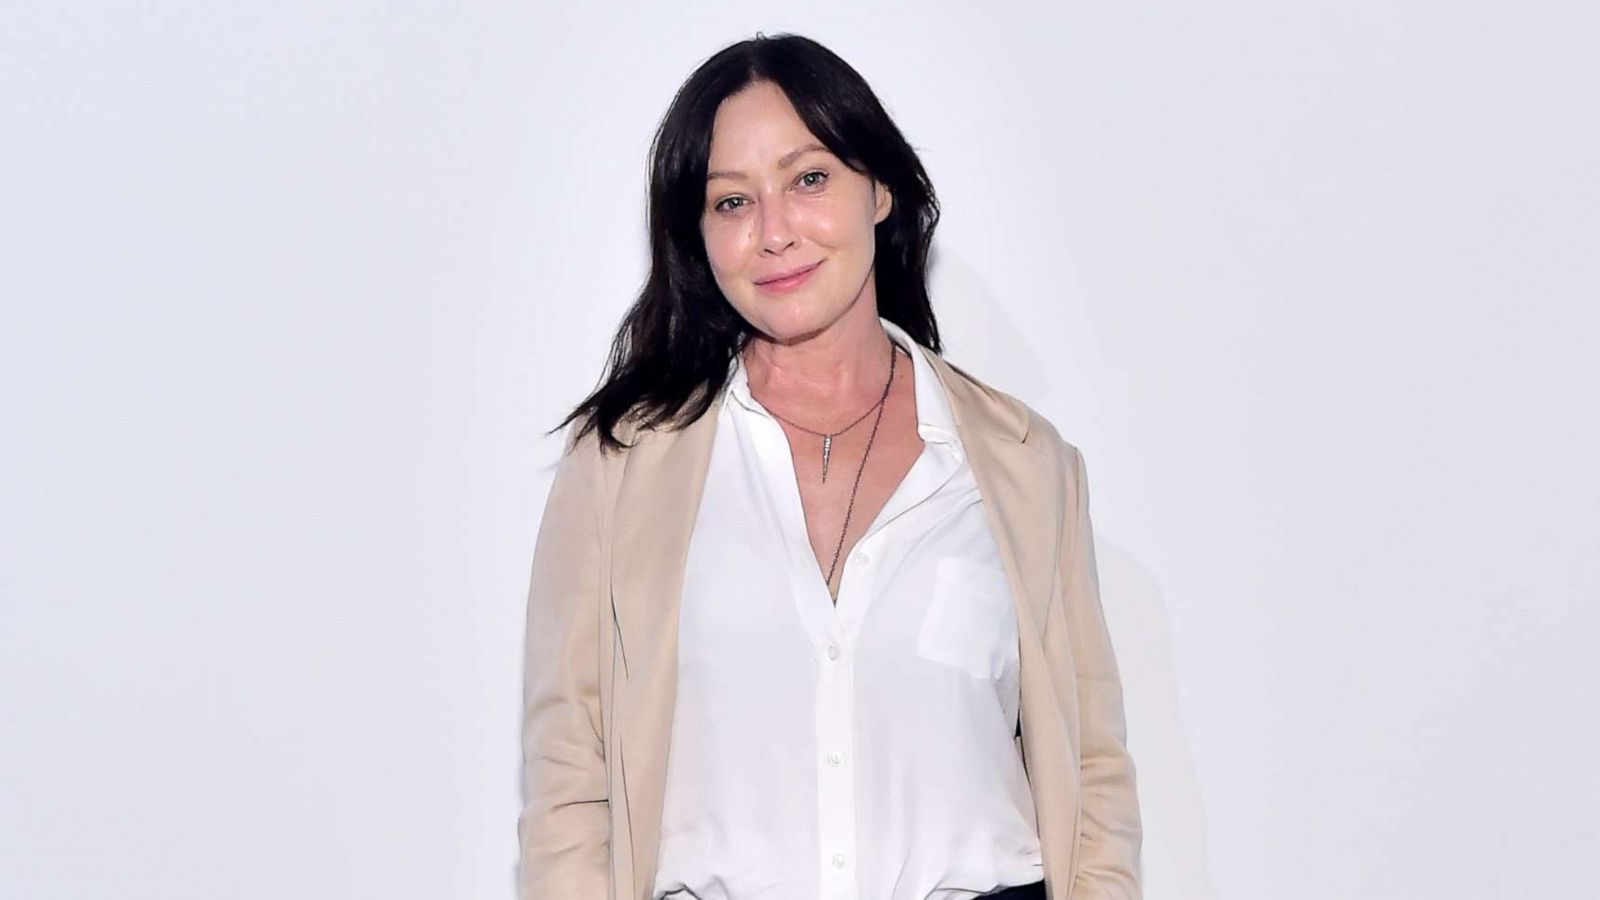 Shannen Doherty Porn - Shannen Doherty calls out Hollywood's botox obsession: 'I want to see more  women like me' - Good Morning America